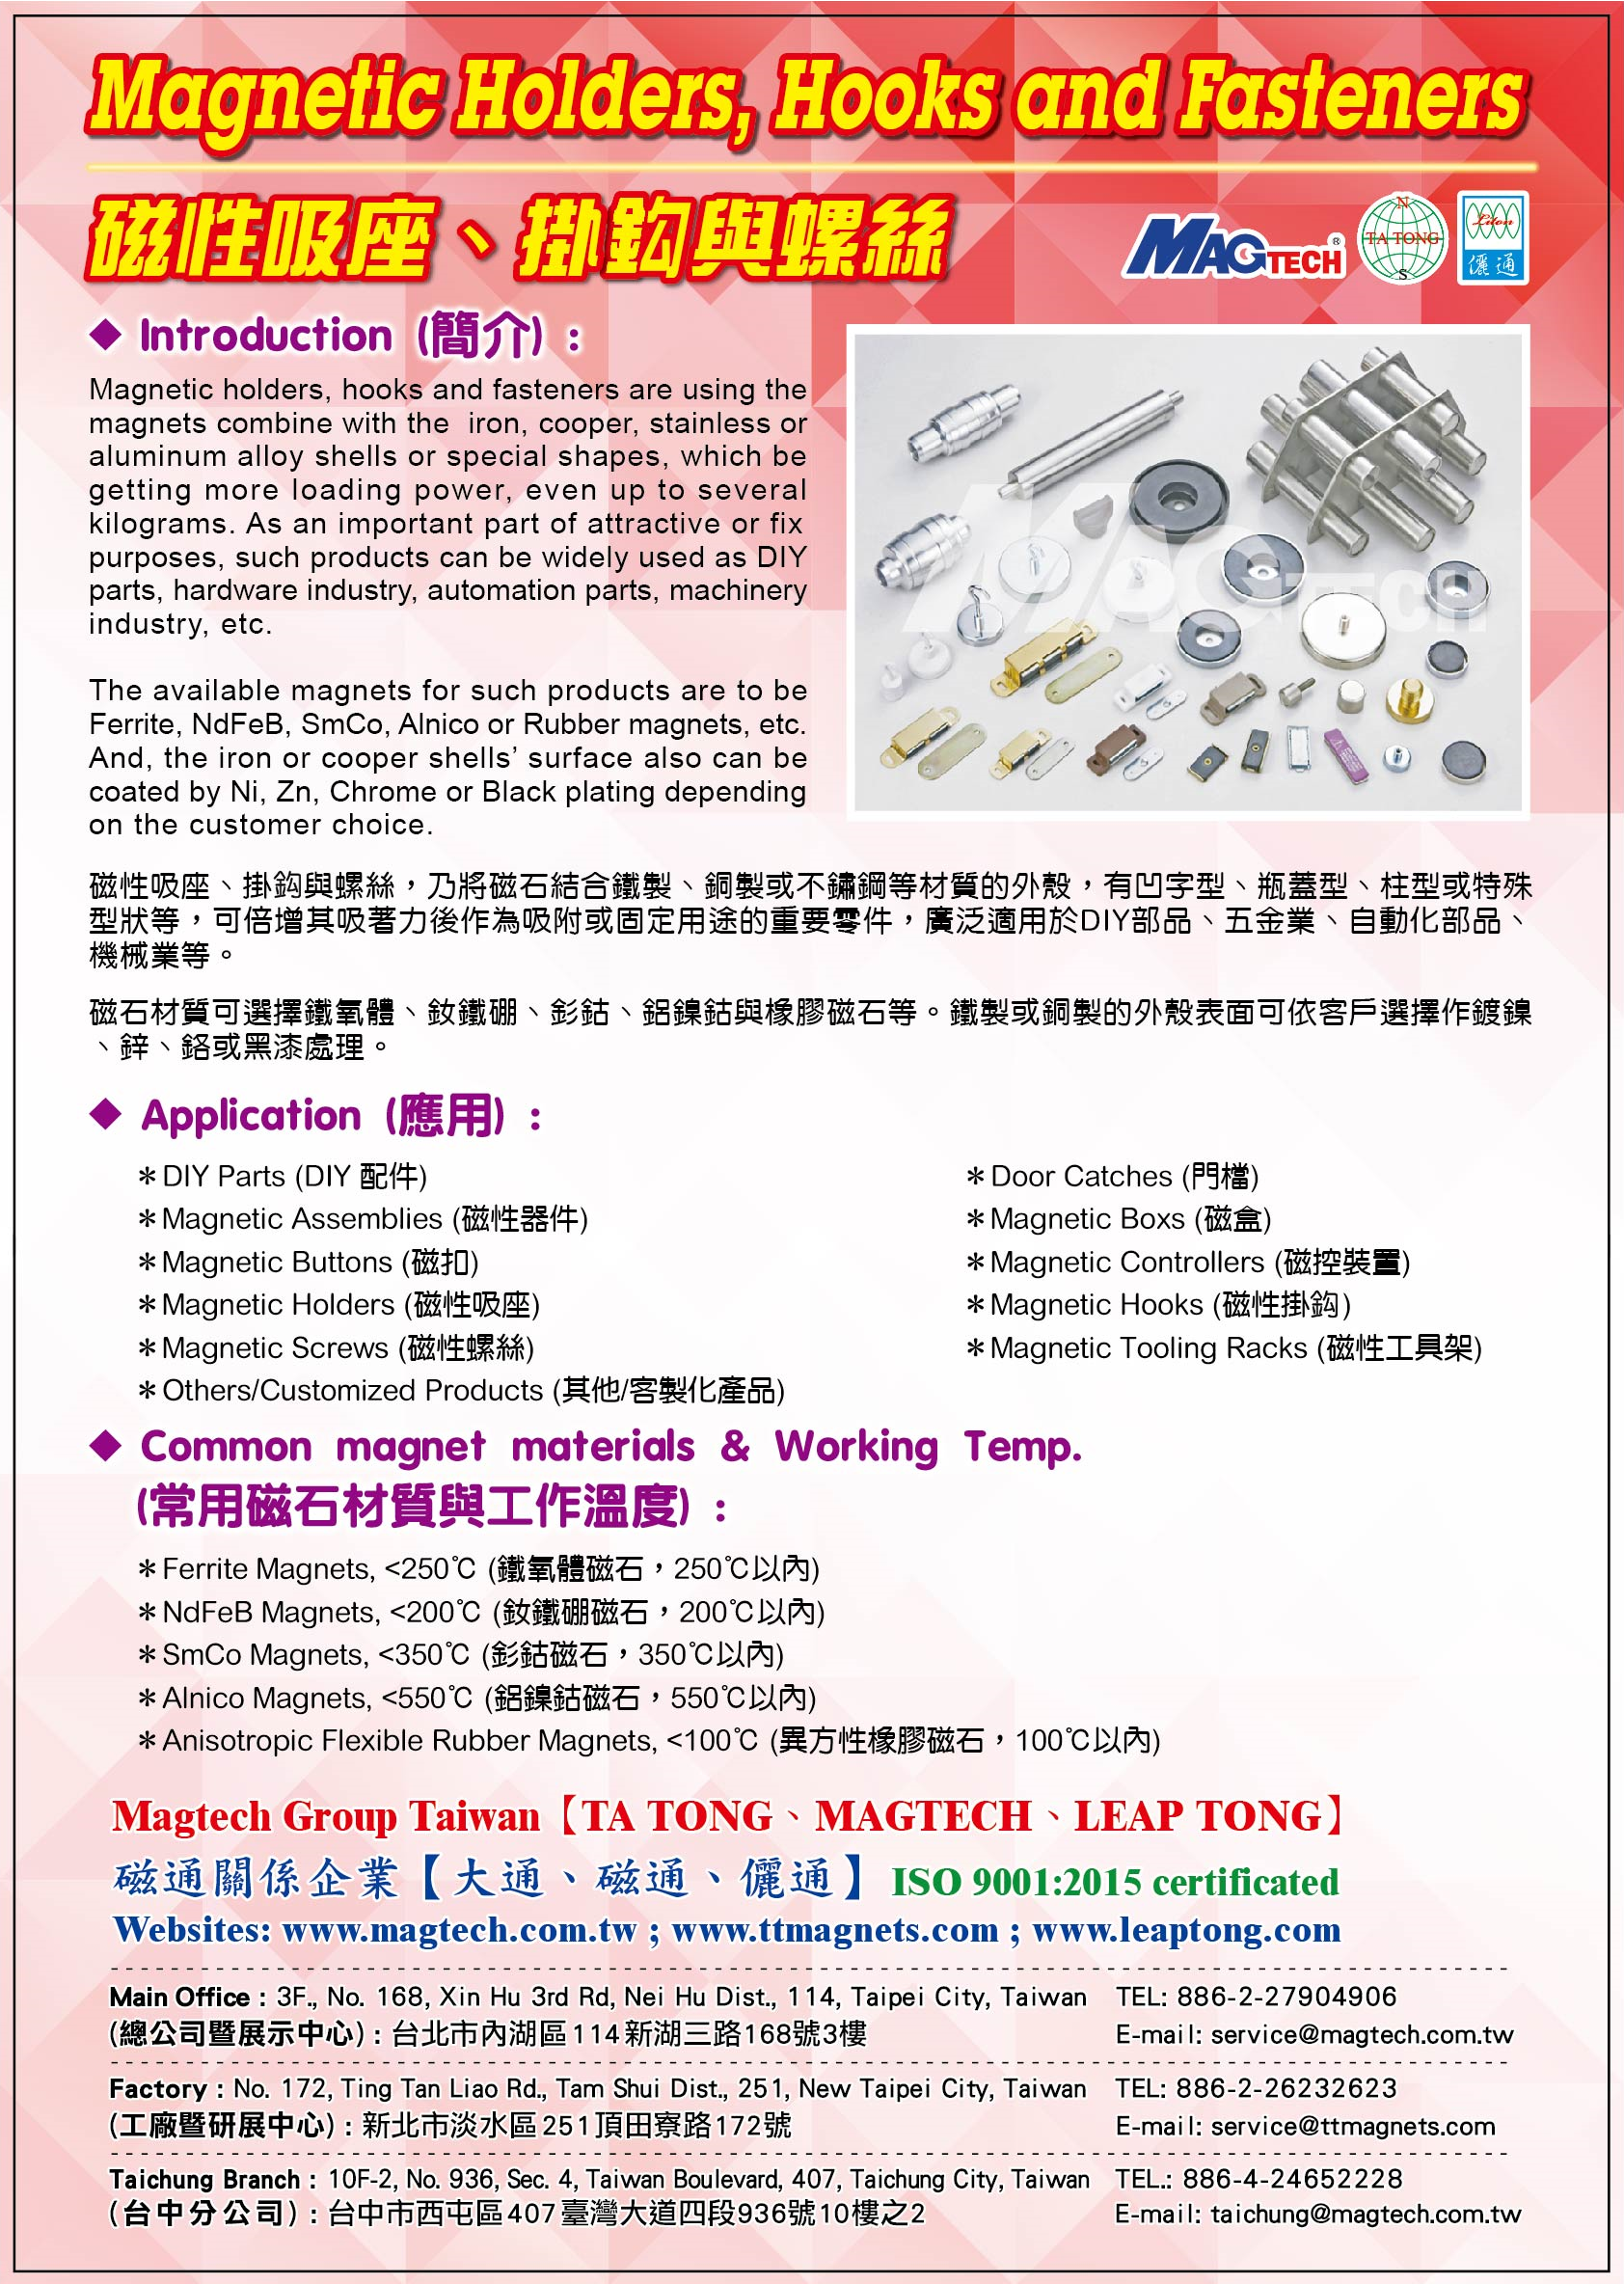 MAGTECH MAGNETIC PRODUCTS CORP. (LEAP TONG)_Online Catalogues